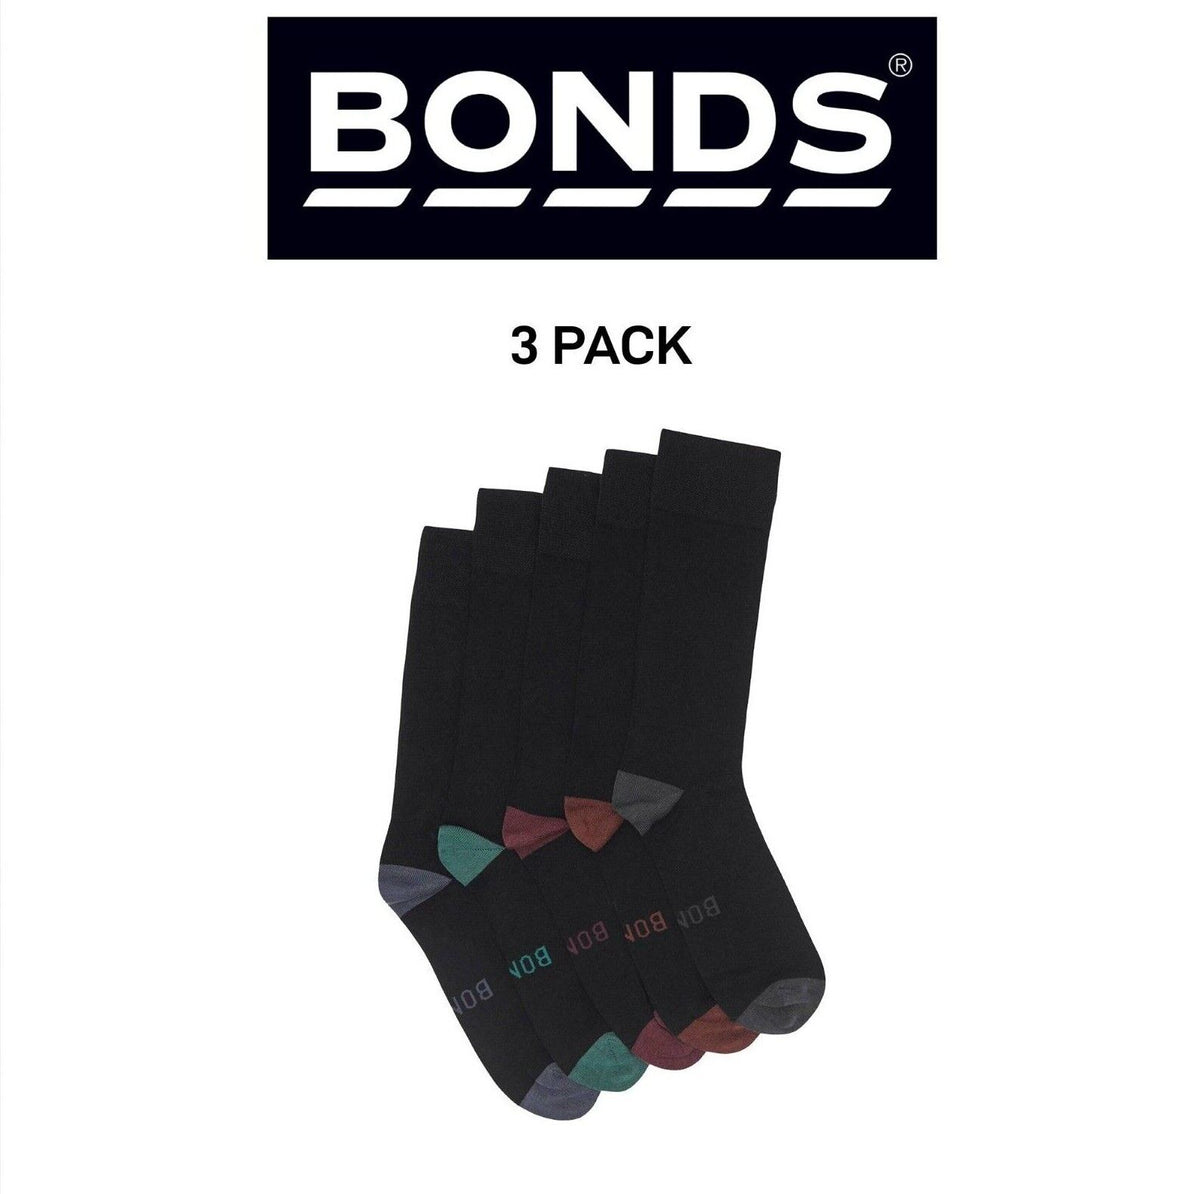 Bonds Mens Bamboo Crew Socks Fine Seams Comfy Toes & Ankle Support 3 Pack SZFQ5W